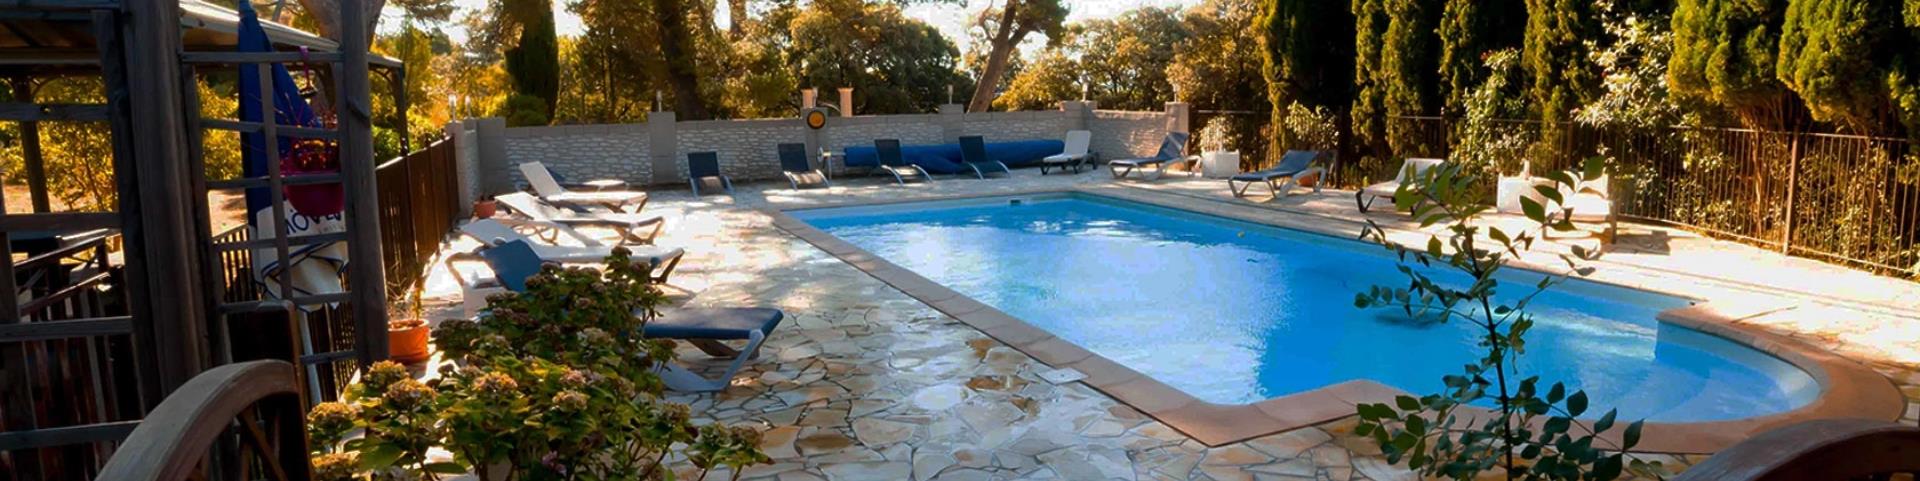 Château Borie Neuve offers rental of winegrower's gîtes and guest houses in the Aude, with outdoor swimming pool